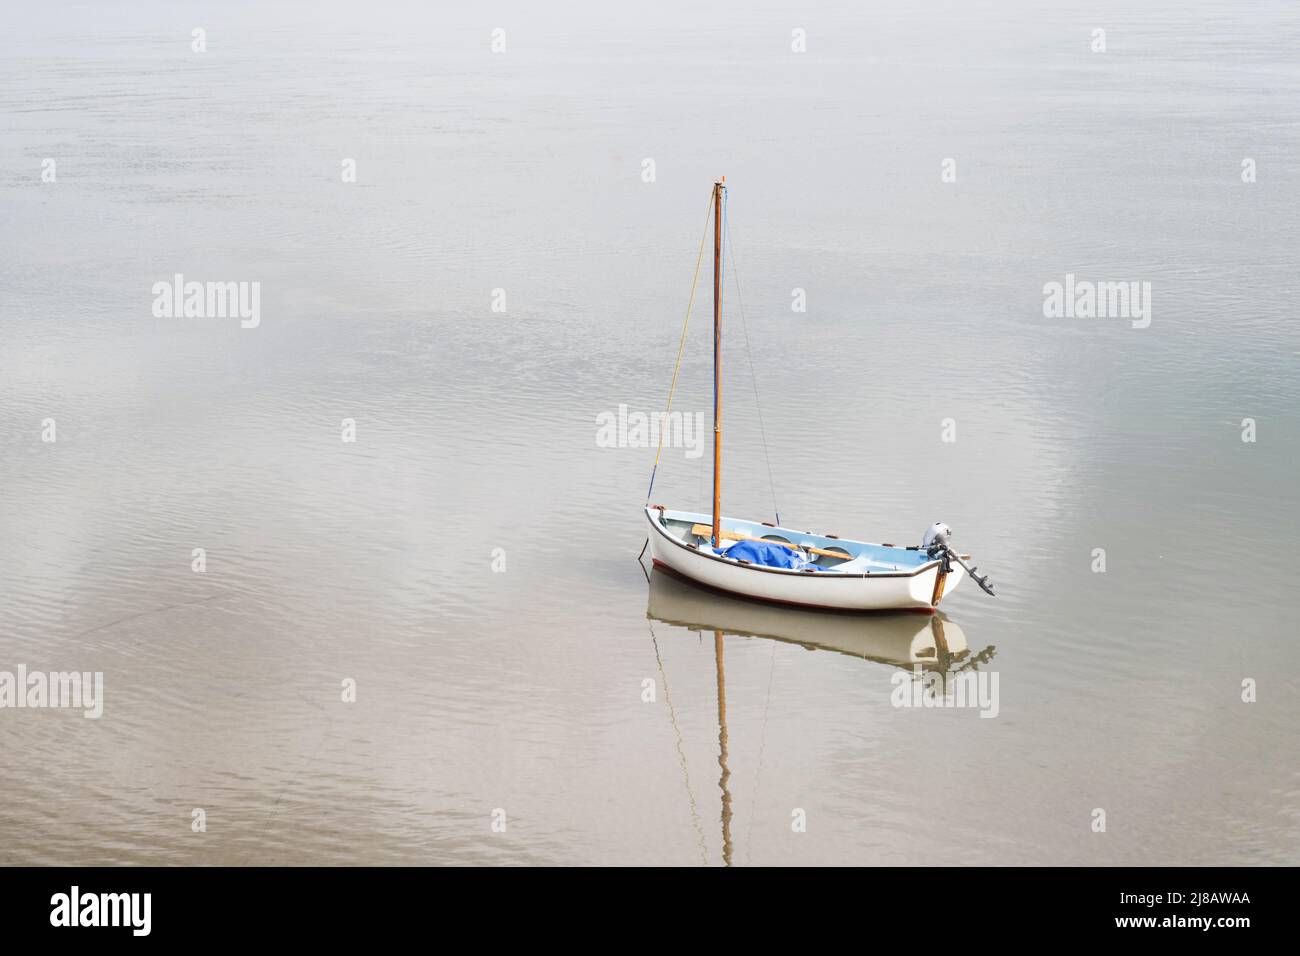 Small sailing boat on calm water with reflections. Stock Photo